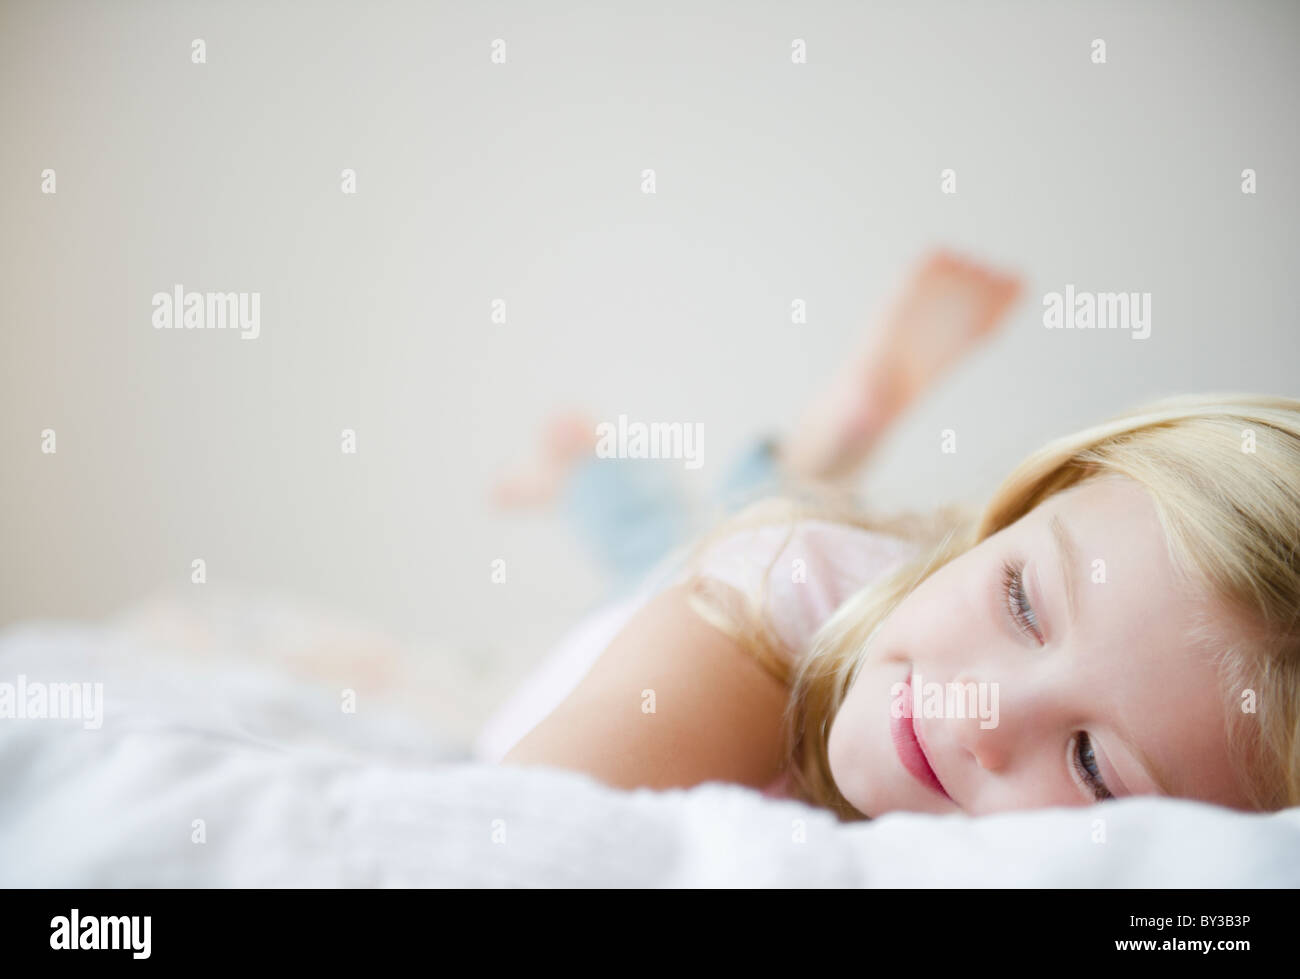 USA, New Jersey, Jersey City, Girl (8-9) laying in bed Banque D'Images